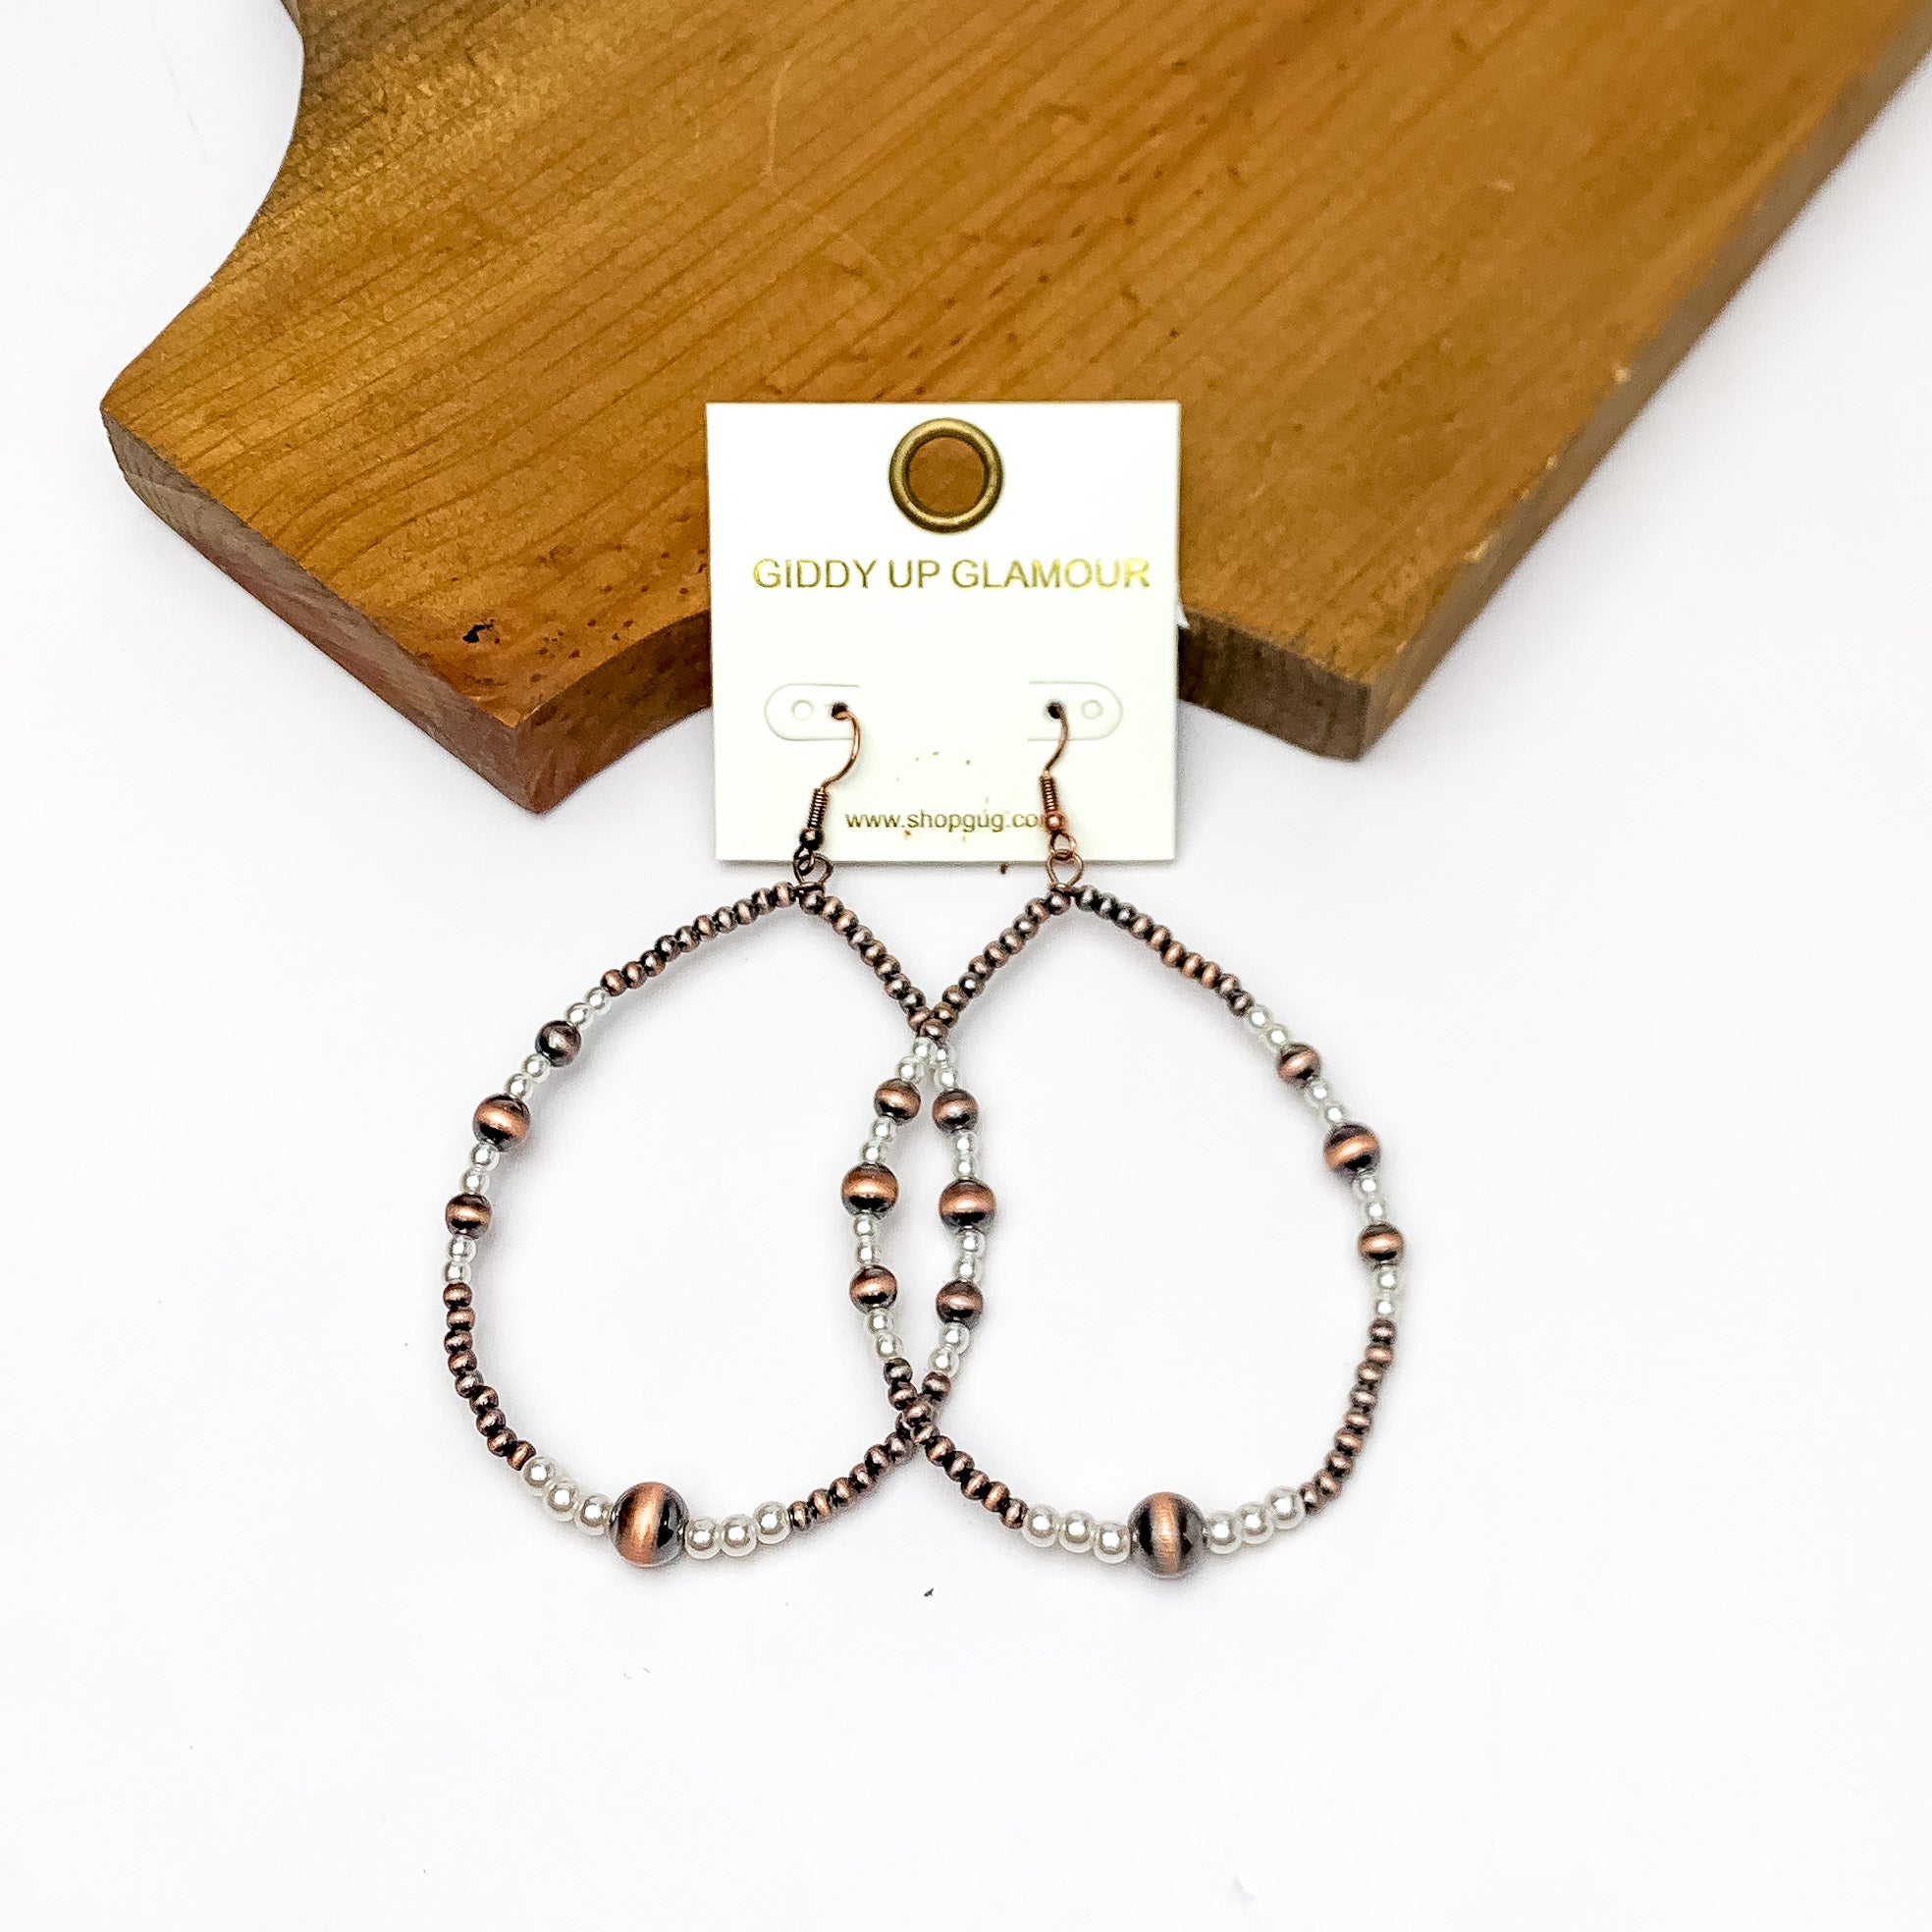 Open Teardrop Earrings With Beads in Copper Tone and White. Pictured on a white background with the earrings against  wood piece.